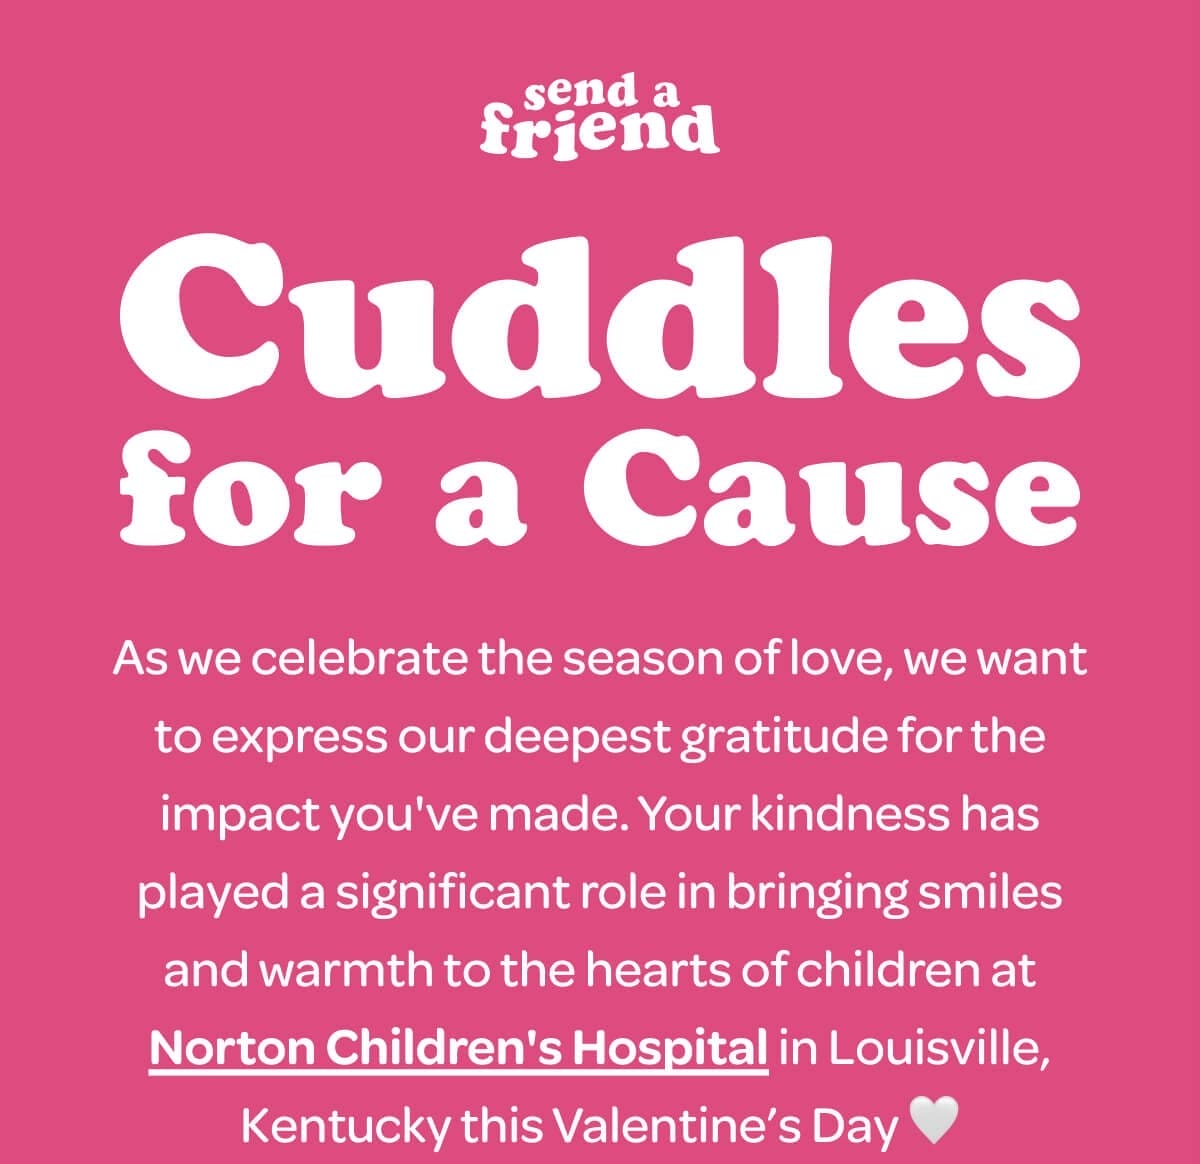 Cuddles for a Cause. As we celebrate the season of love, we want to express our deepest gratitude for the impact you've made. Your kindness has played a significant role in bringing smiles and warmth to the hearts of children at [Norton Children's Hospital] in Louisville, Kentucky this Valentine’s Day \U0001f90d